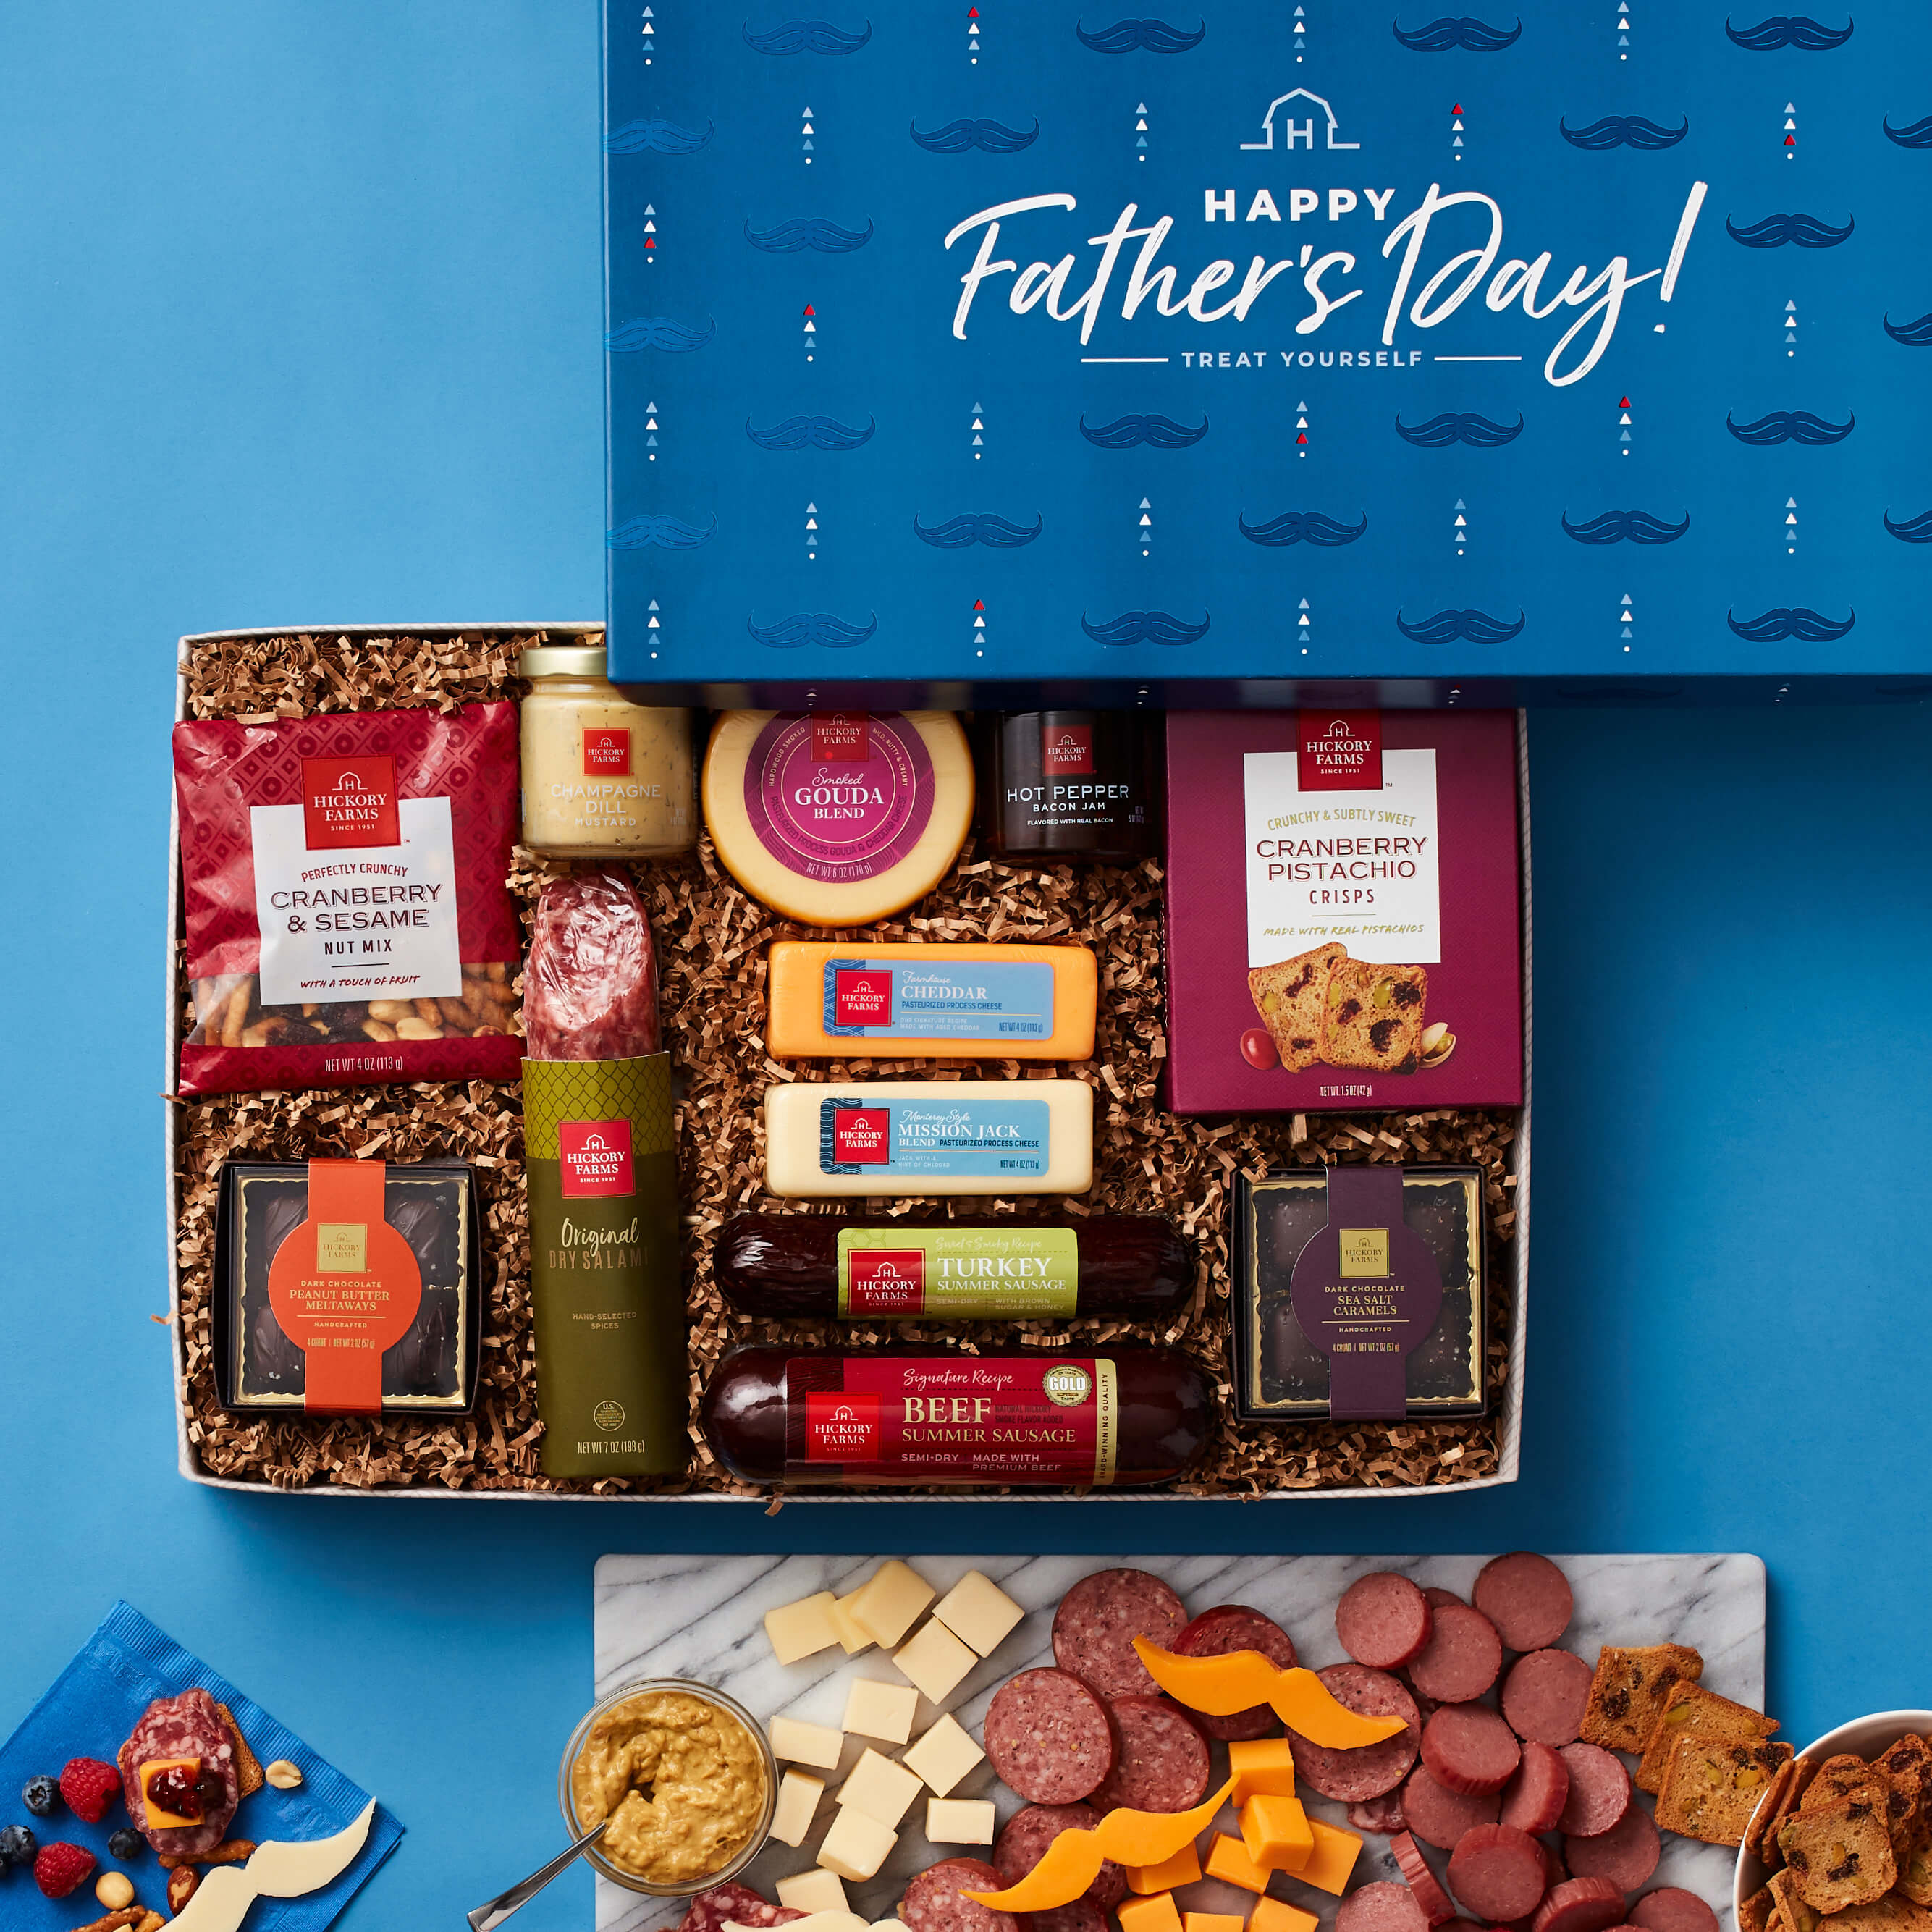 A Hickory Farms gift box with meat, cheese, chocolates, crackers, and condiments in a Father's Day gift box